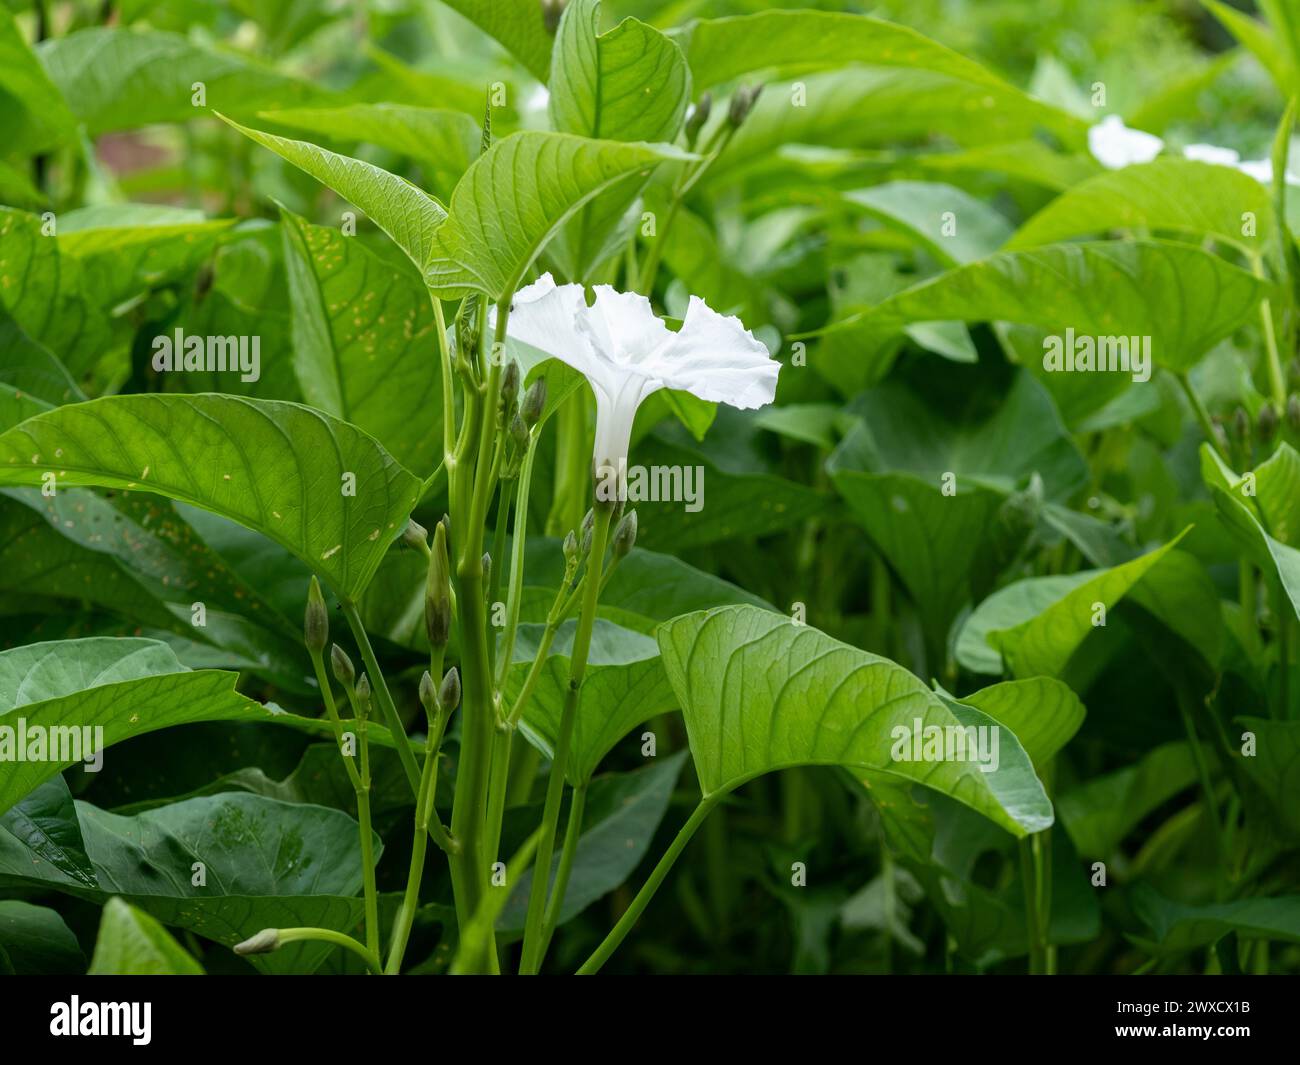 White flower bloom of the green leafy Kangkong or water Spinach growing in a vegetable garden Stock Photo